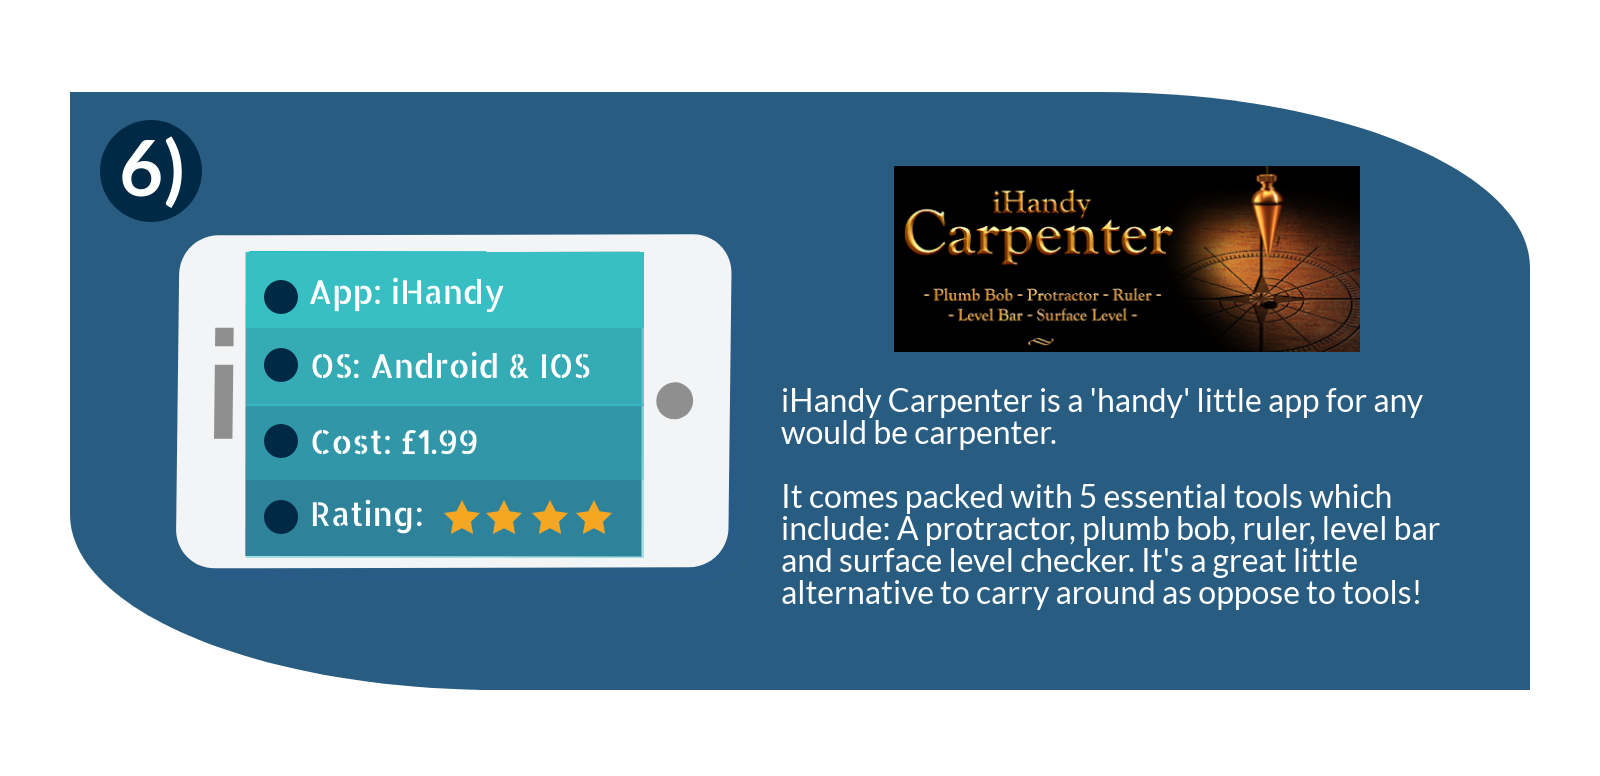 iHandy carpenter is a useful app for any carpenter